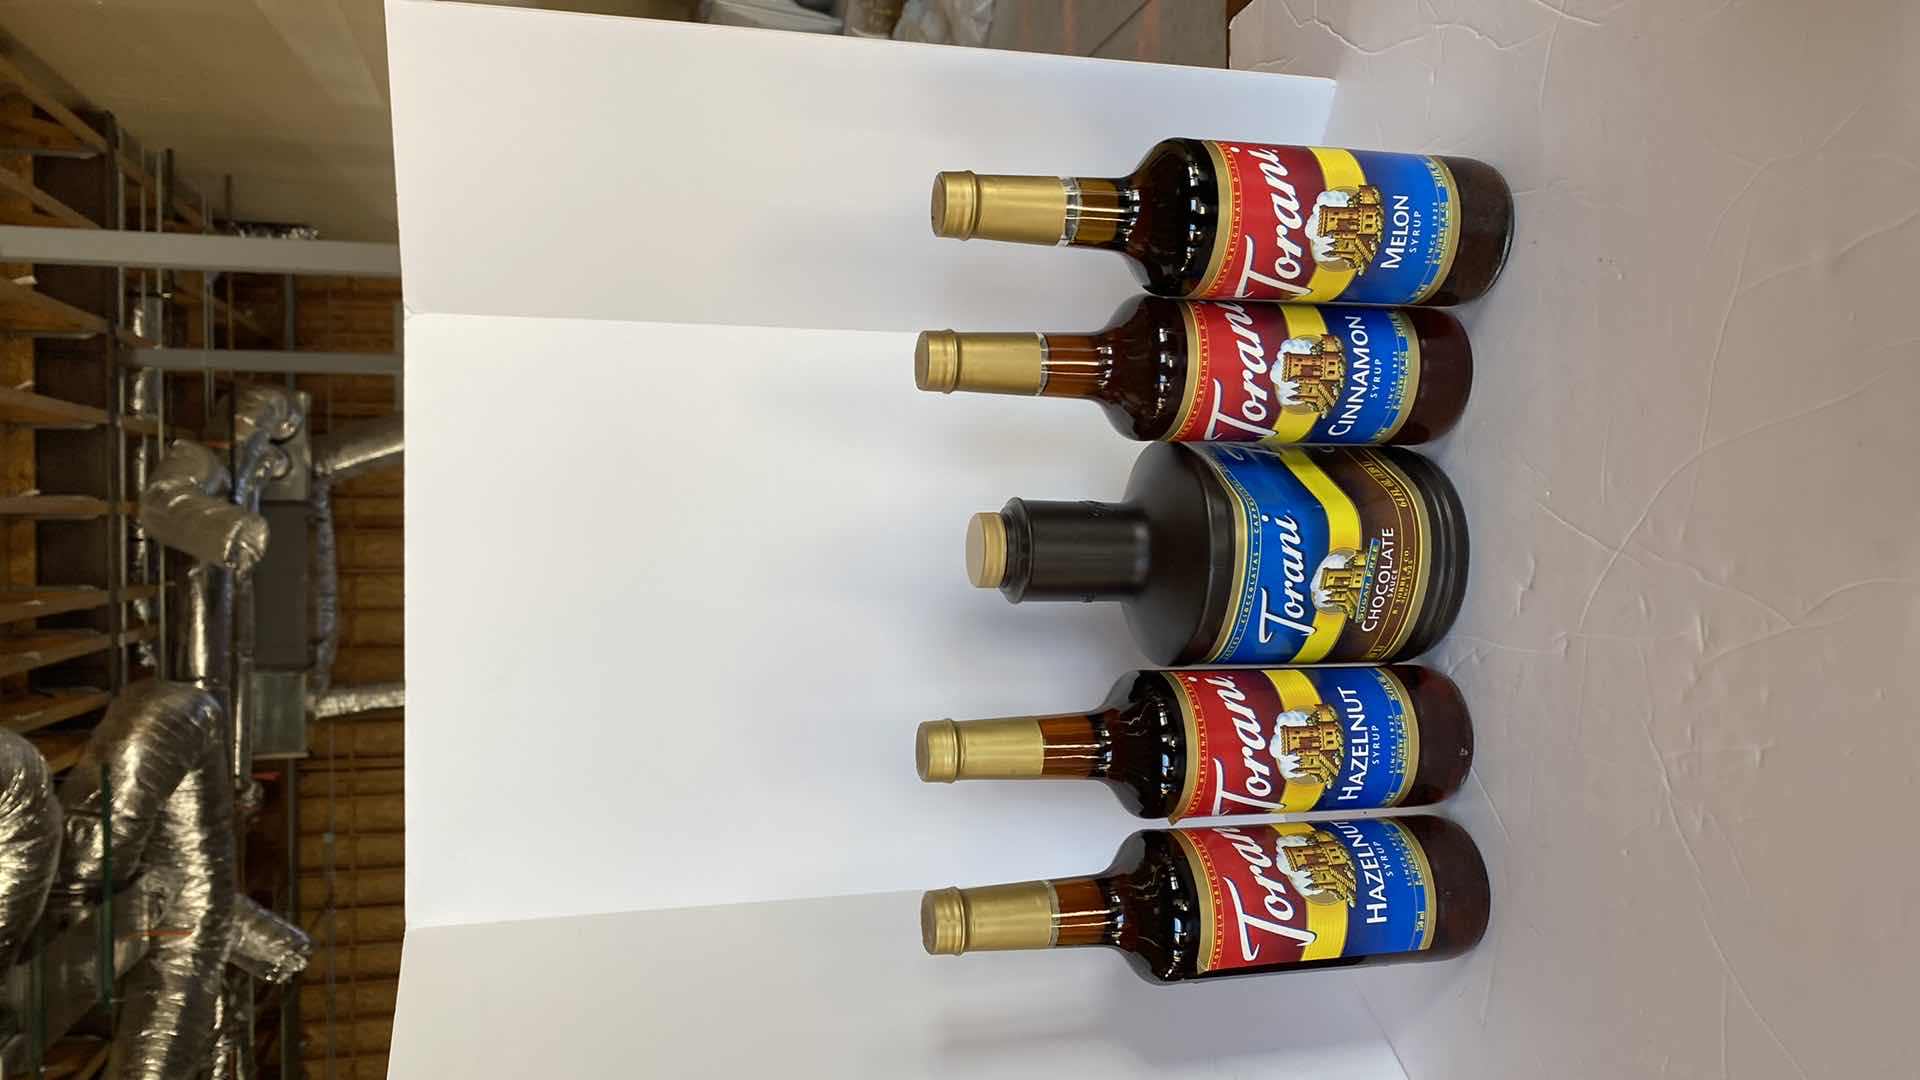 Photo 1 of TORANI CHOCOLATE SAUCE AND 4 SYRUPS UNKNOWN EXPIRATION DATES